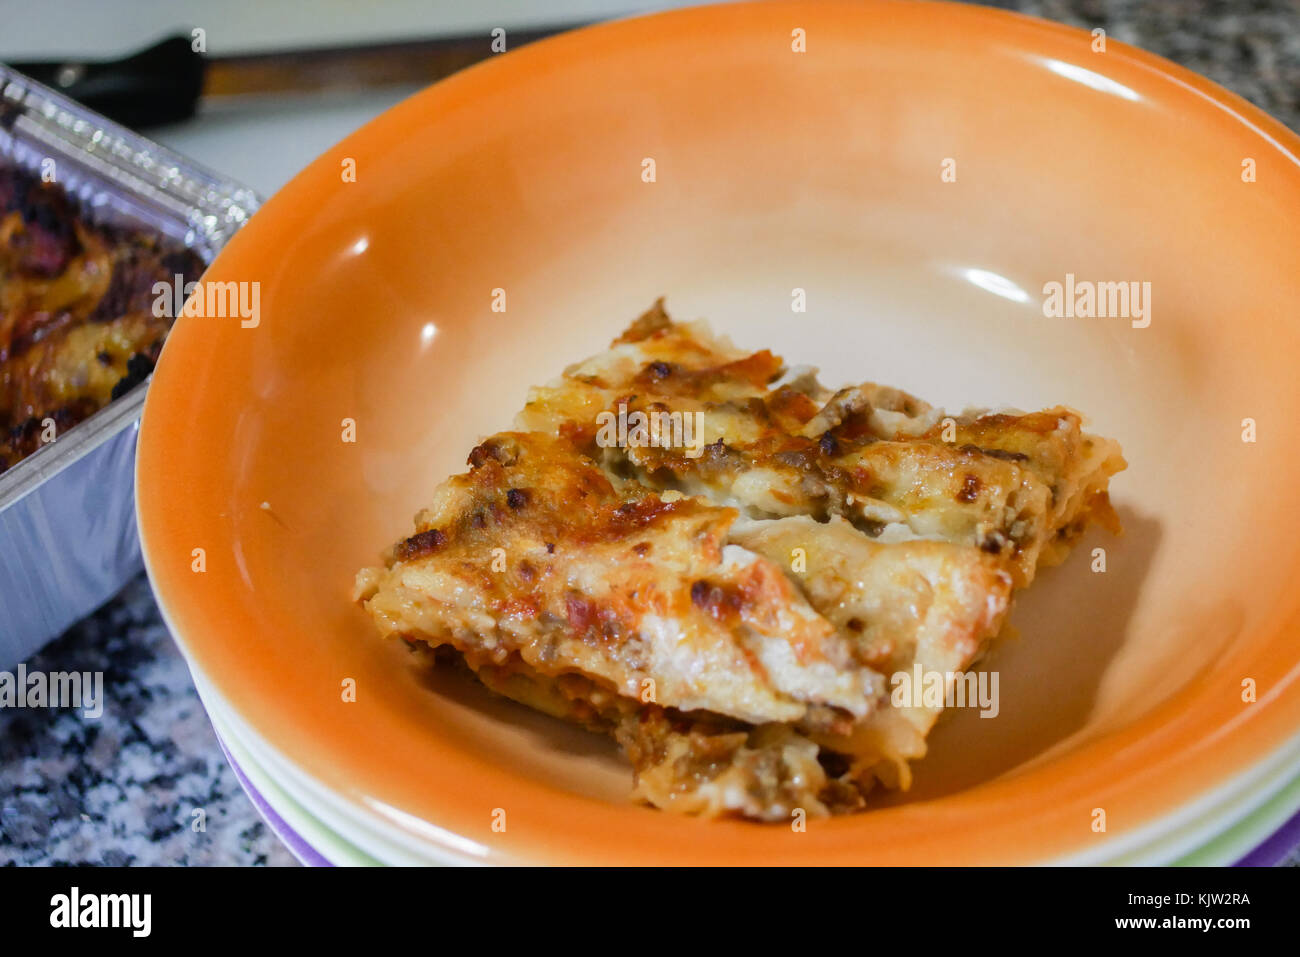 Dish of Lasagne, typical italian culture food, ready to be eaten, winter season. Meat version. Florence, Italy Stock Photo